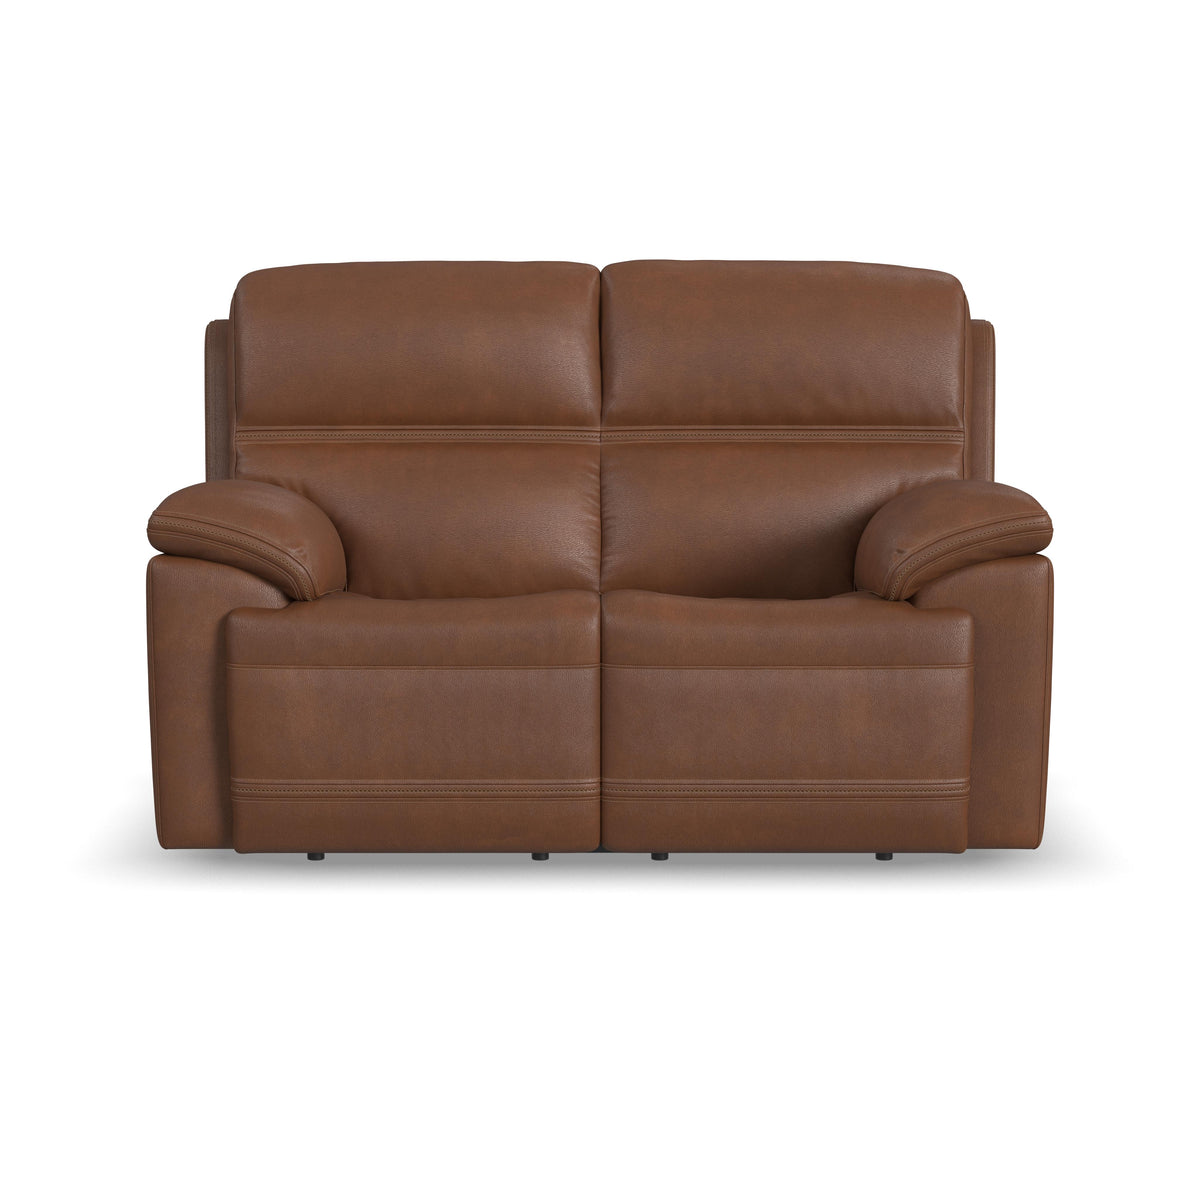 Jackson Power Reclining Loveseat with Power Headrests